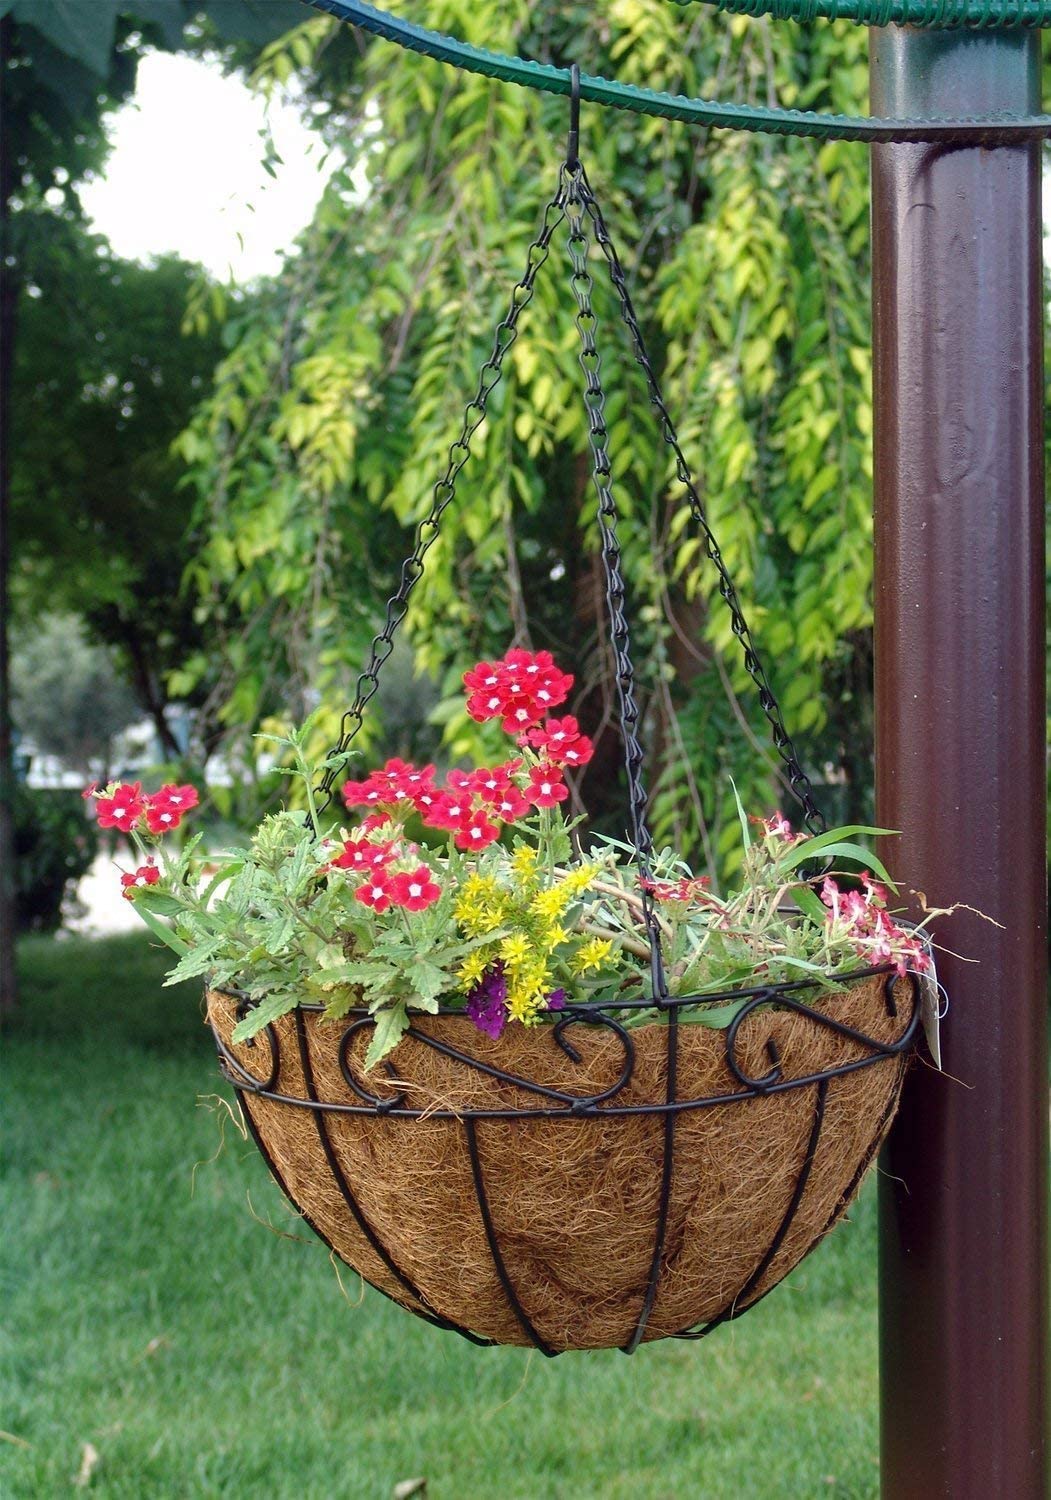 Windfall Metal Hanging Planter Basket with Coco Coir Liner Round Wire Plant Holder with Chain Porch Decor Flower Pots Hanger Garden Decoration Indoor Outdoor Watering Hanging Baskets - image 5 of 7